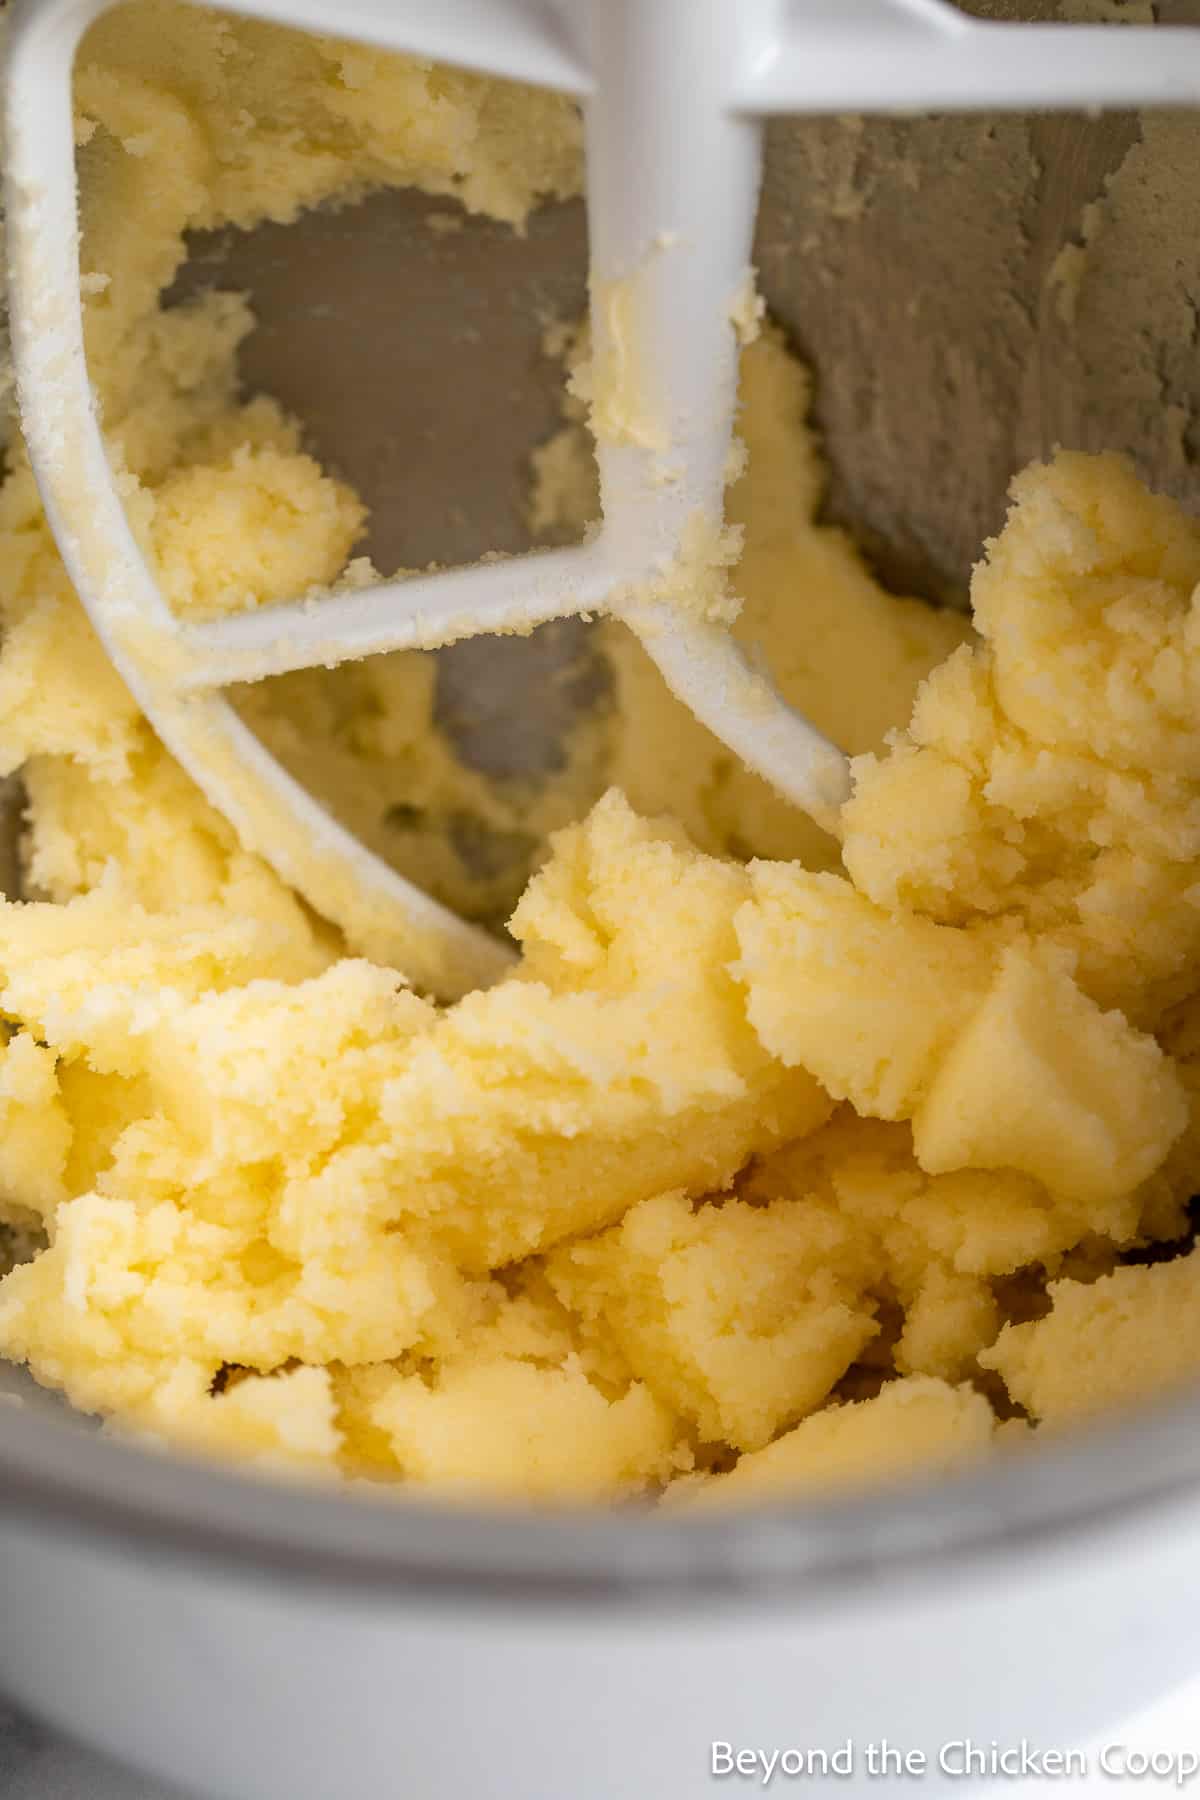 Butter and sugar in a mixing bowl. 